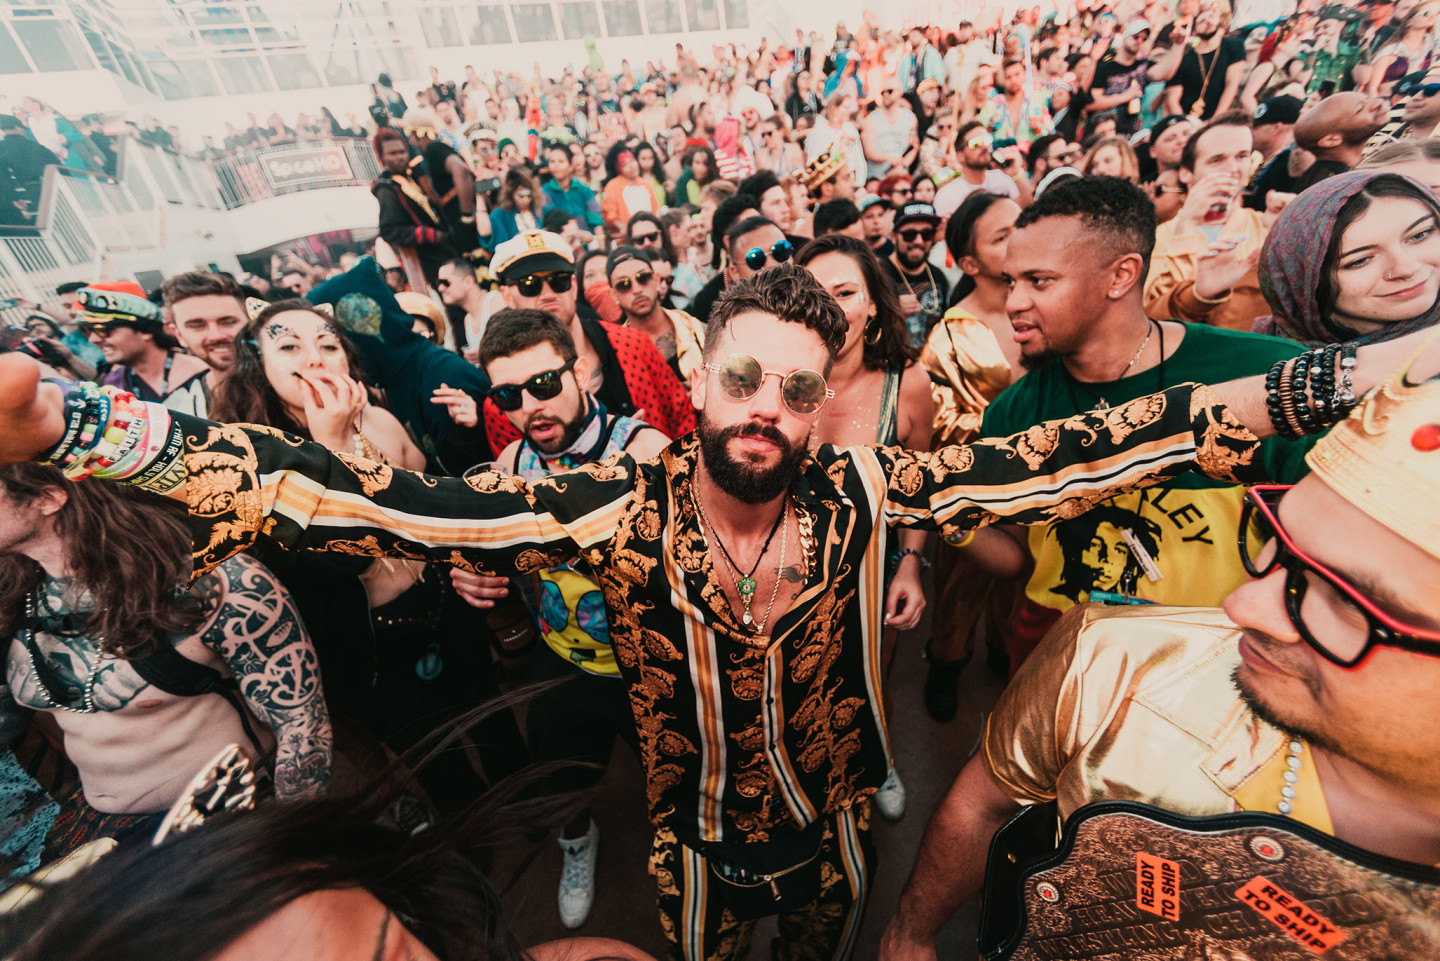 Death, grief, and designer sunglasses on an EDM cruise to nowhere